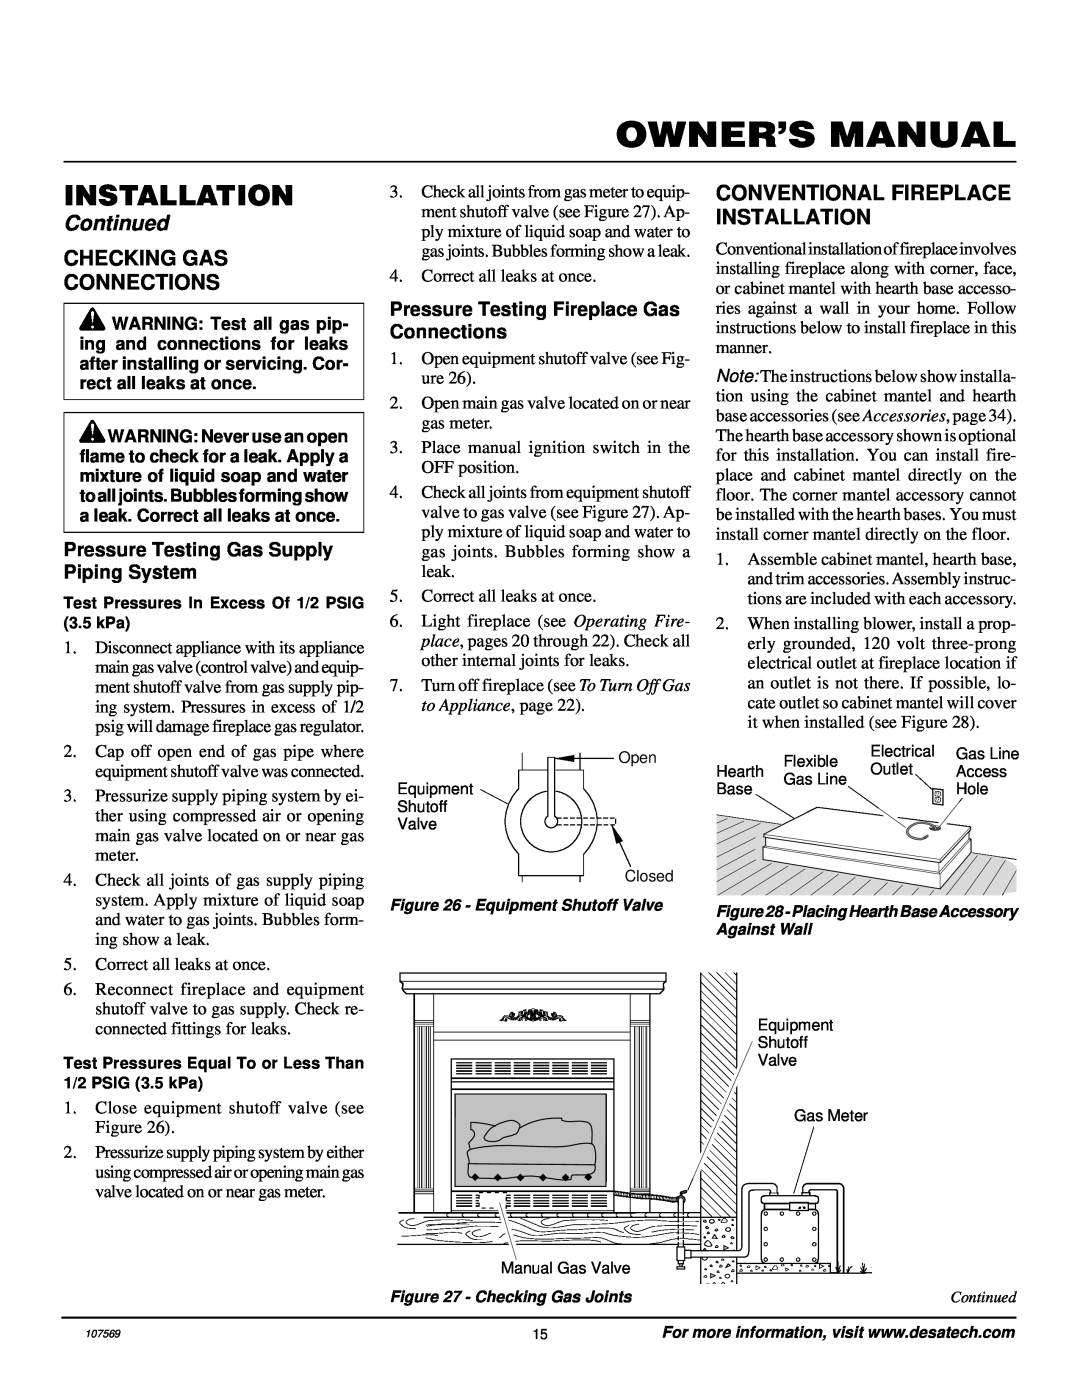 Desa CGEFP33NR installation manual Checking Gas Connections, Conventional Fireplace Installation, Continued 